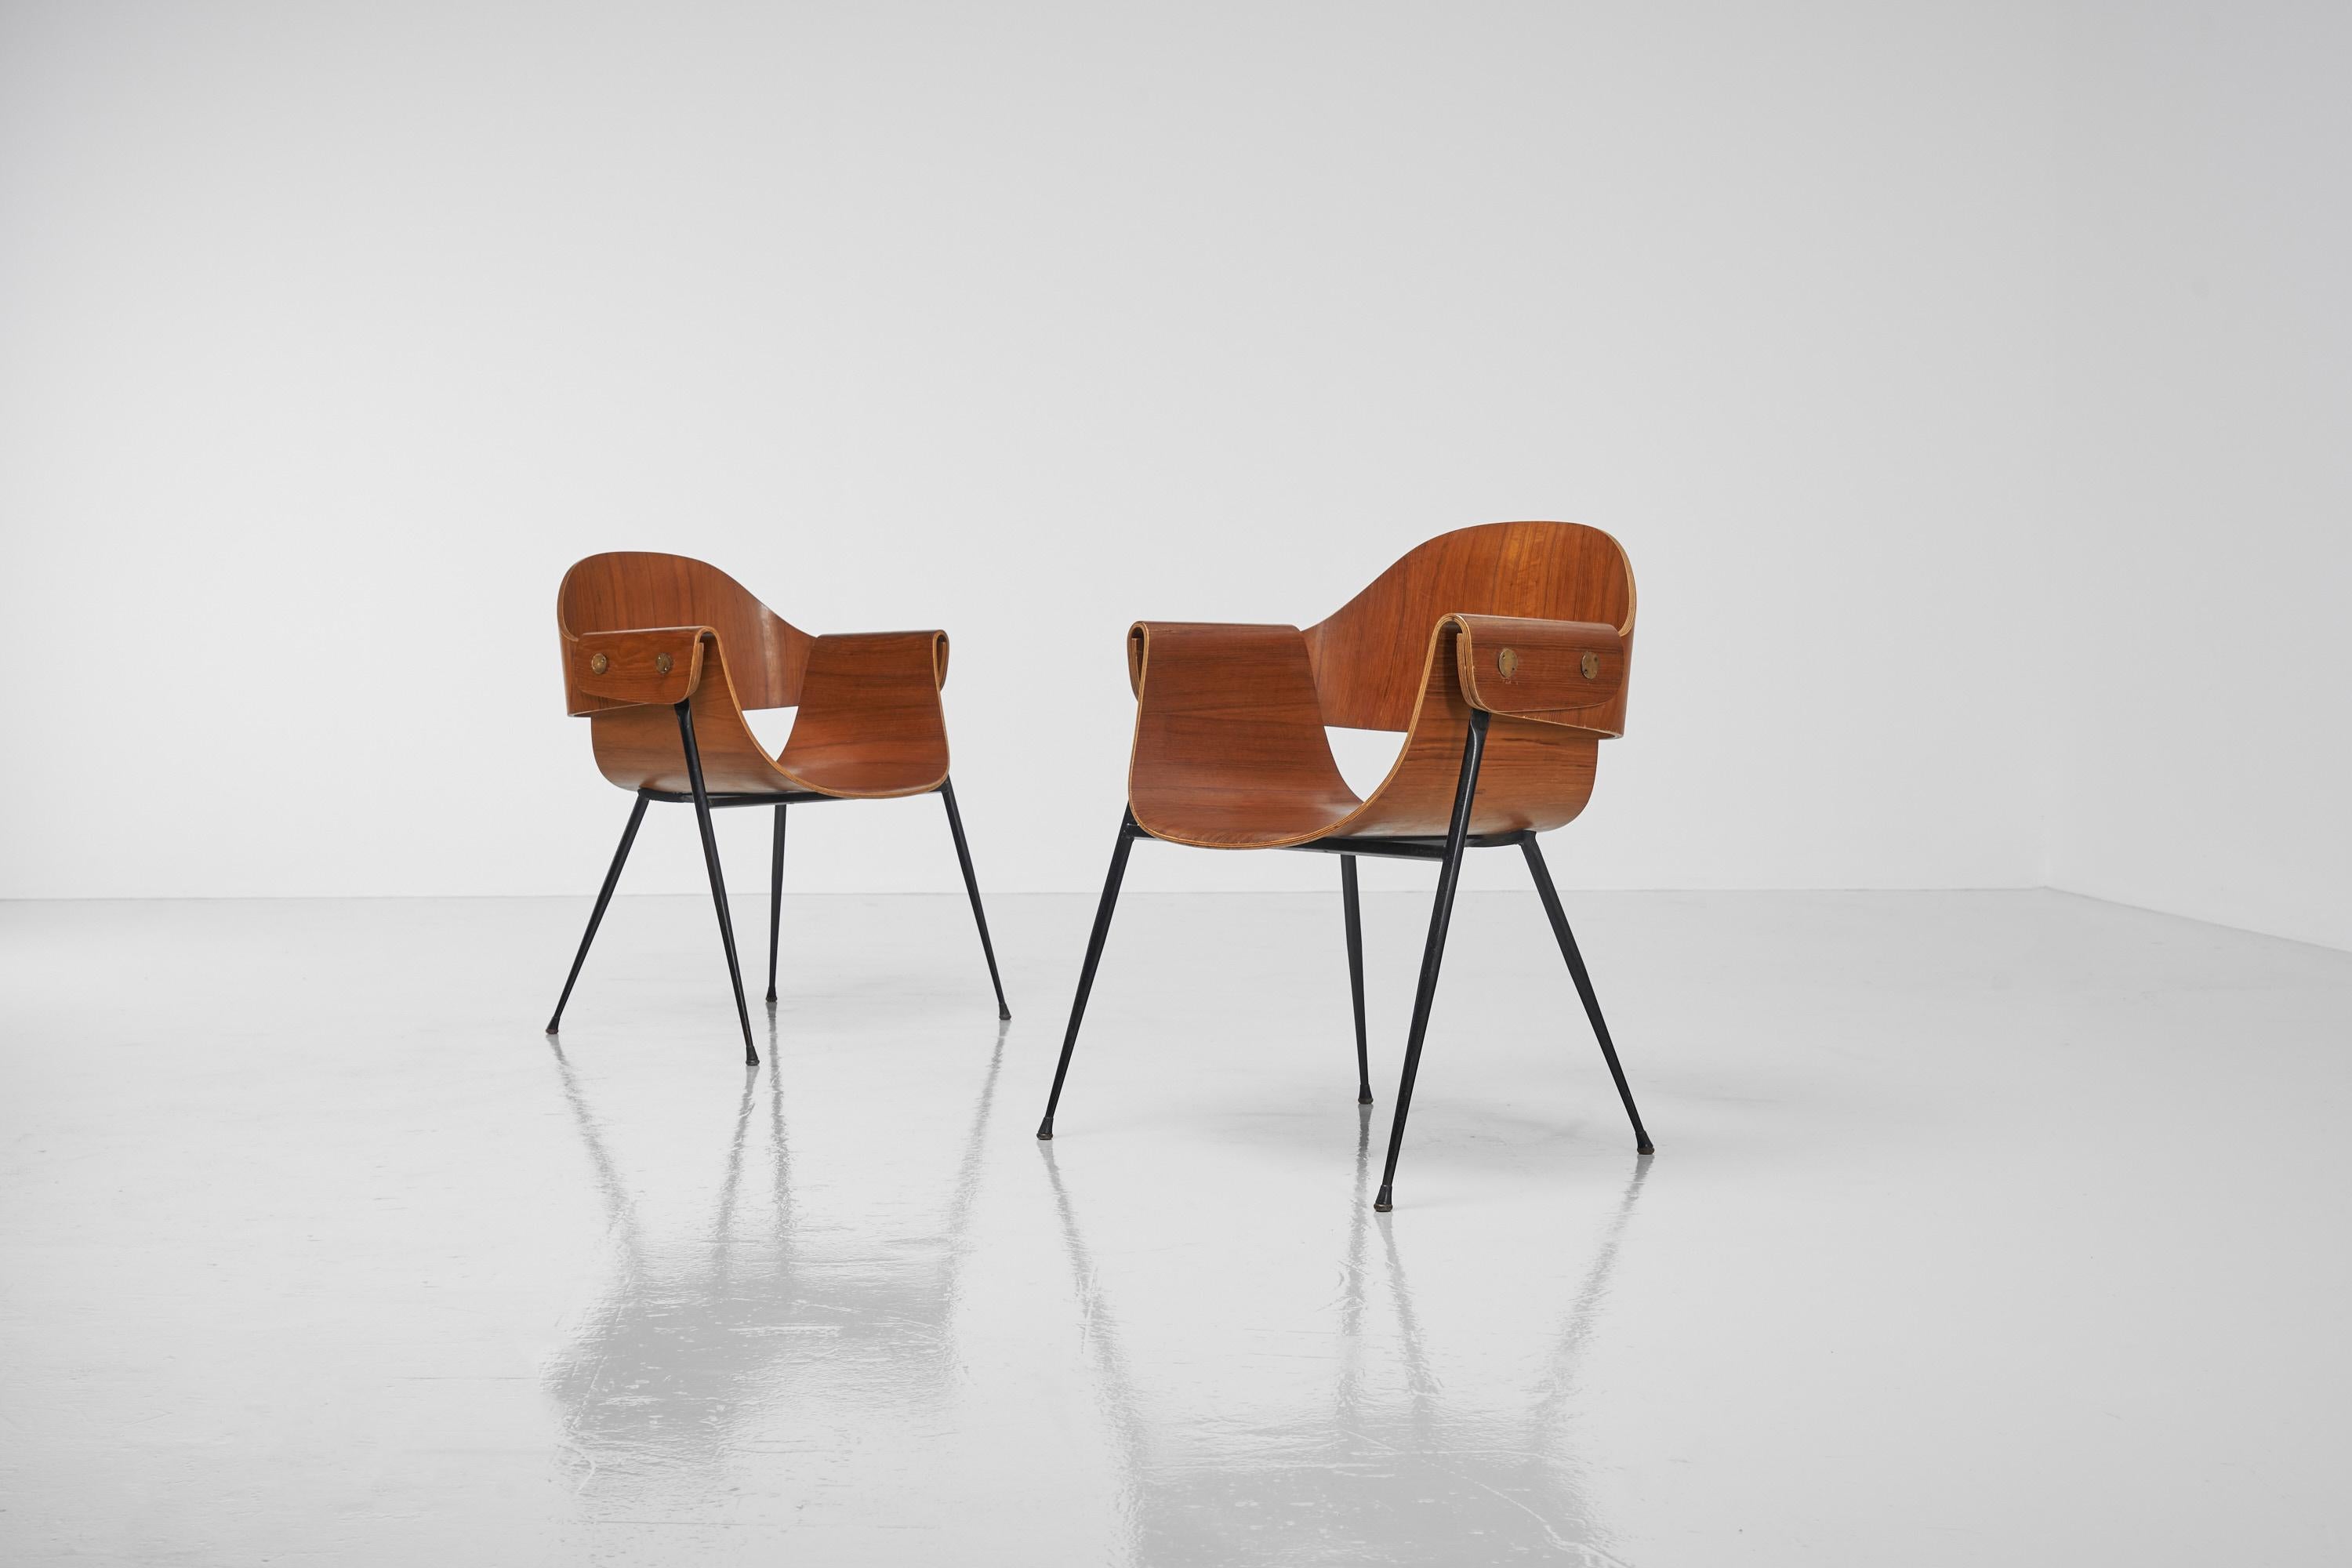 Highly elegant pair of armchairs designed by Carlo Ratti and manufactured by Industria Legni Curvati, Italy 1950s. These visually appealing armchairs have a very nice and extraordinary shaped teak plywood seat. Besides the fact that the seat looks